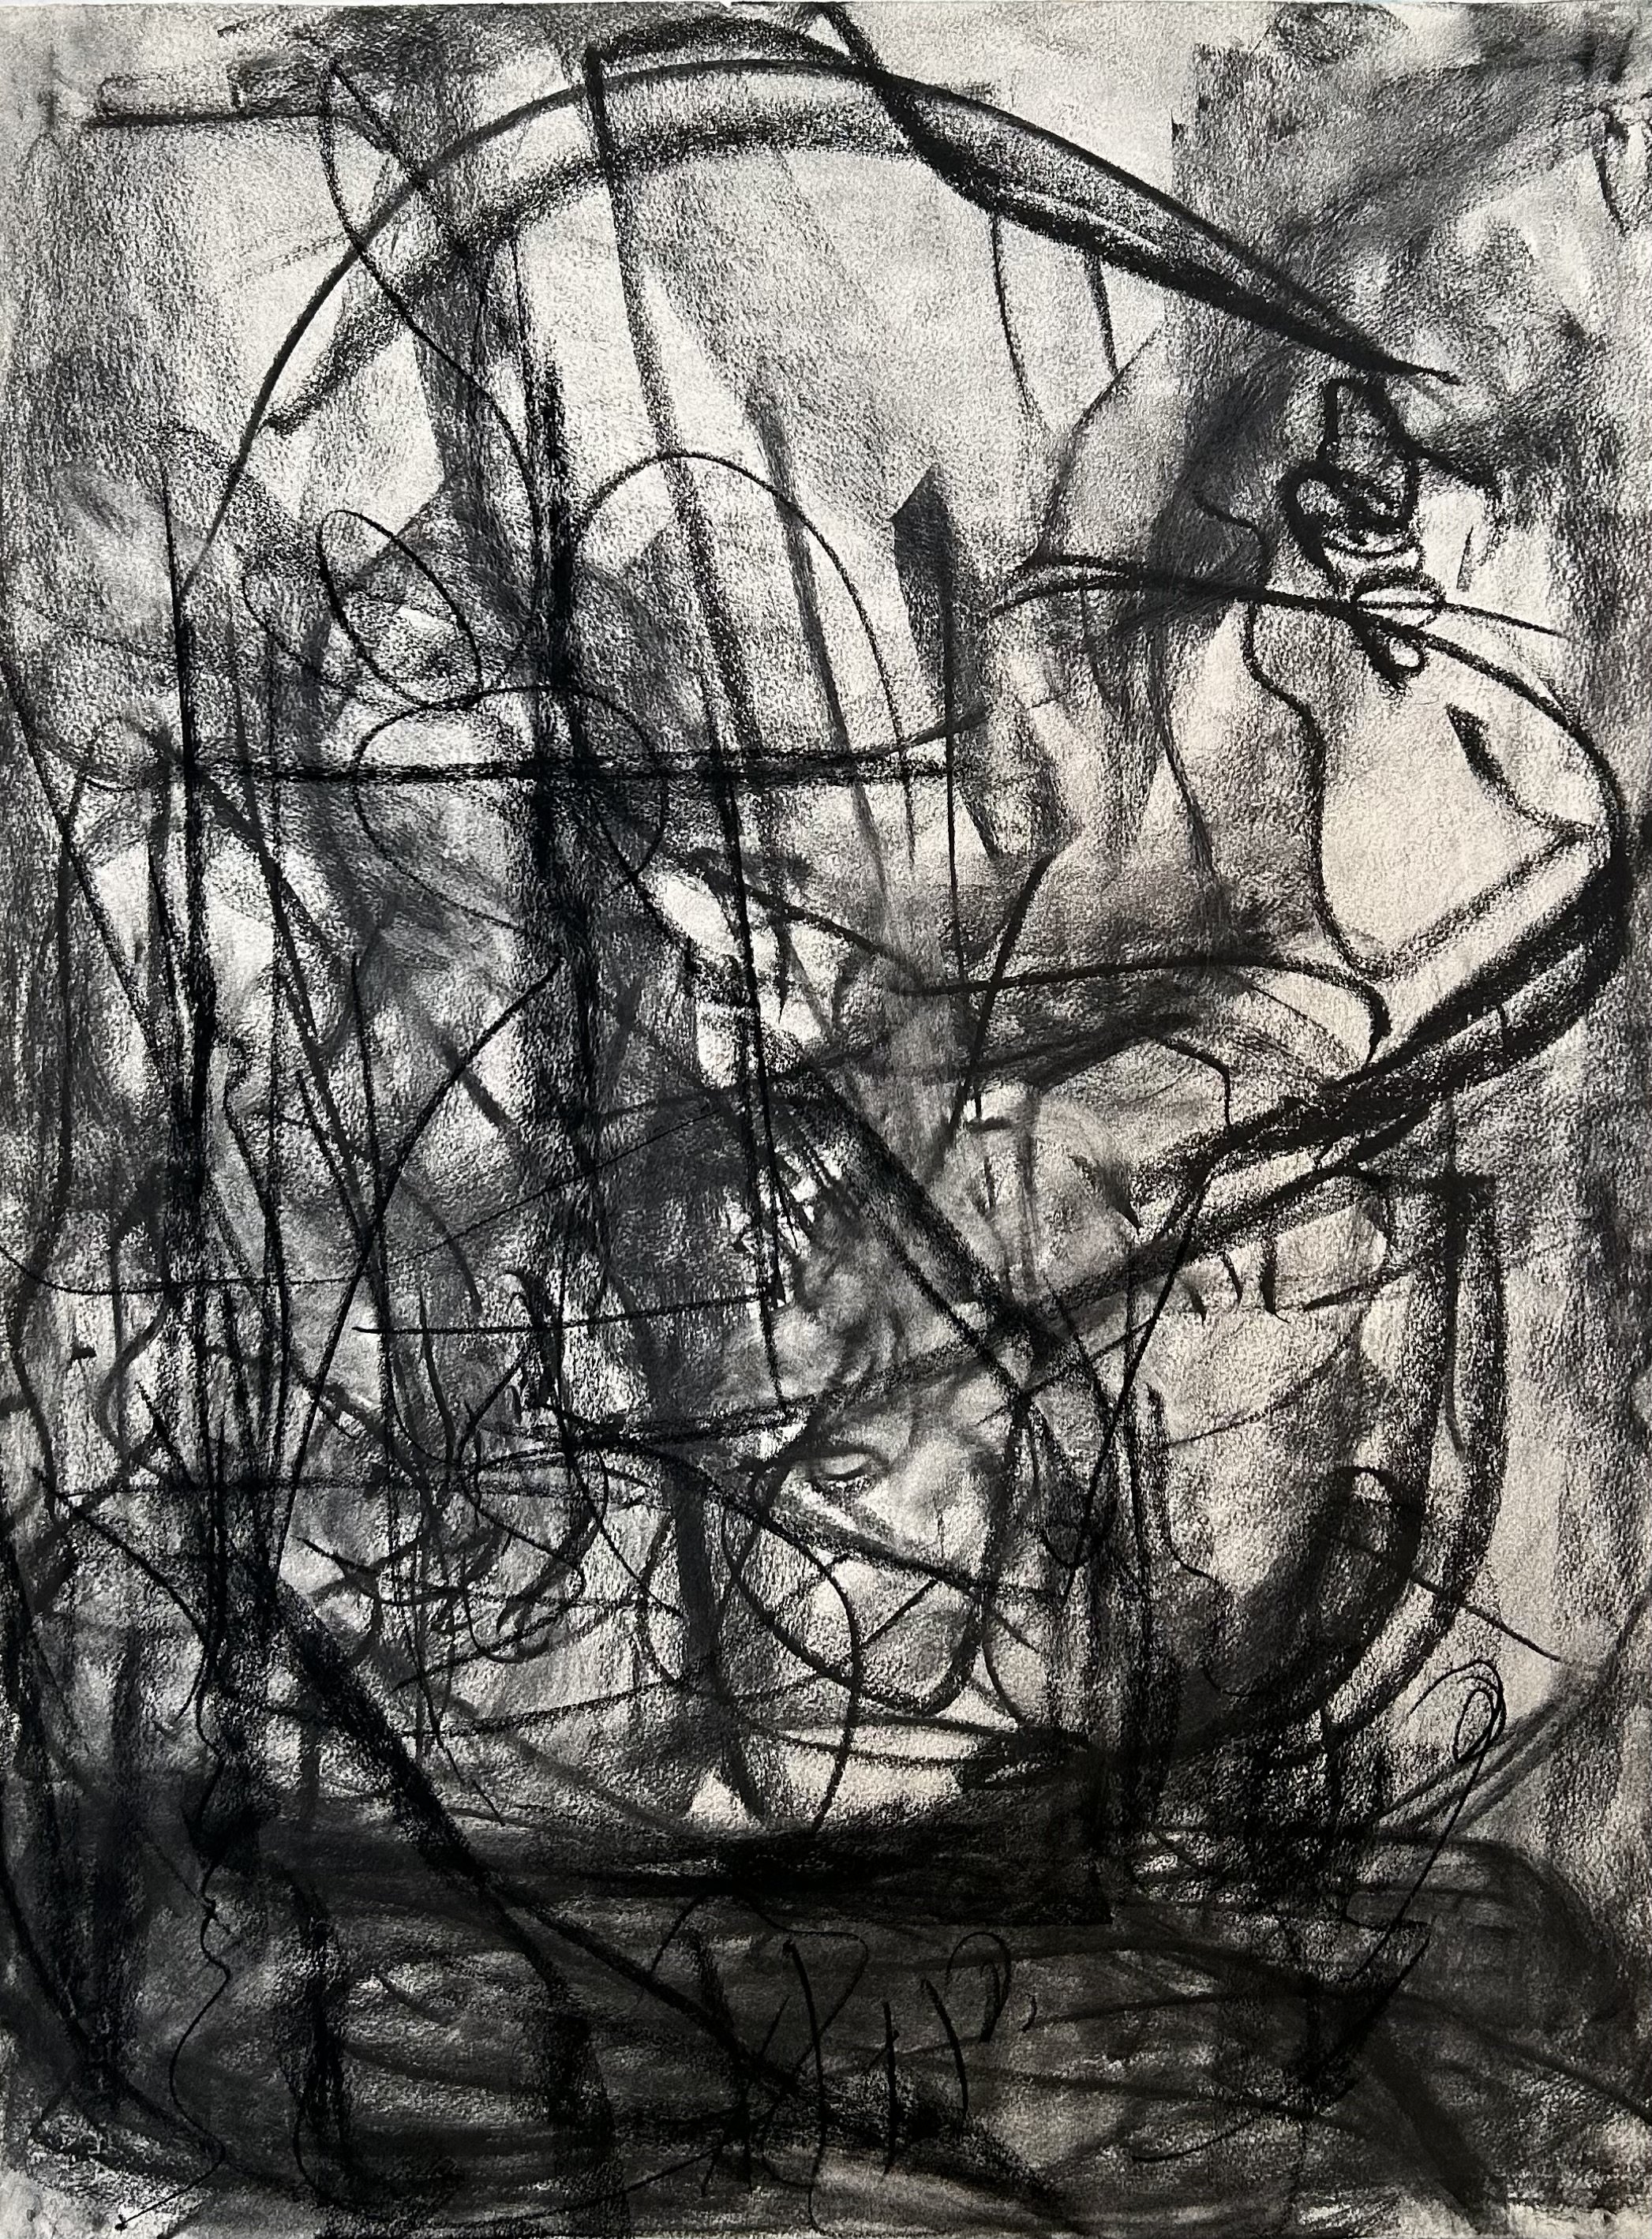 “Ship of Fools”, charcoal on Arches coverwhite, 30”x22” (5-20-2014)